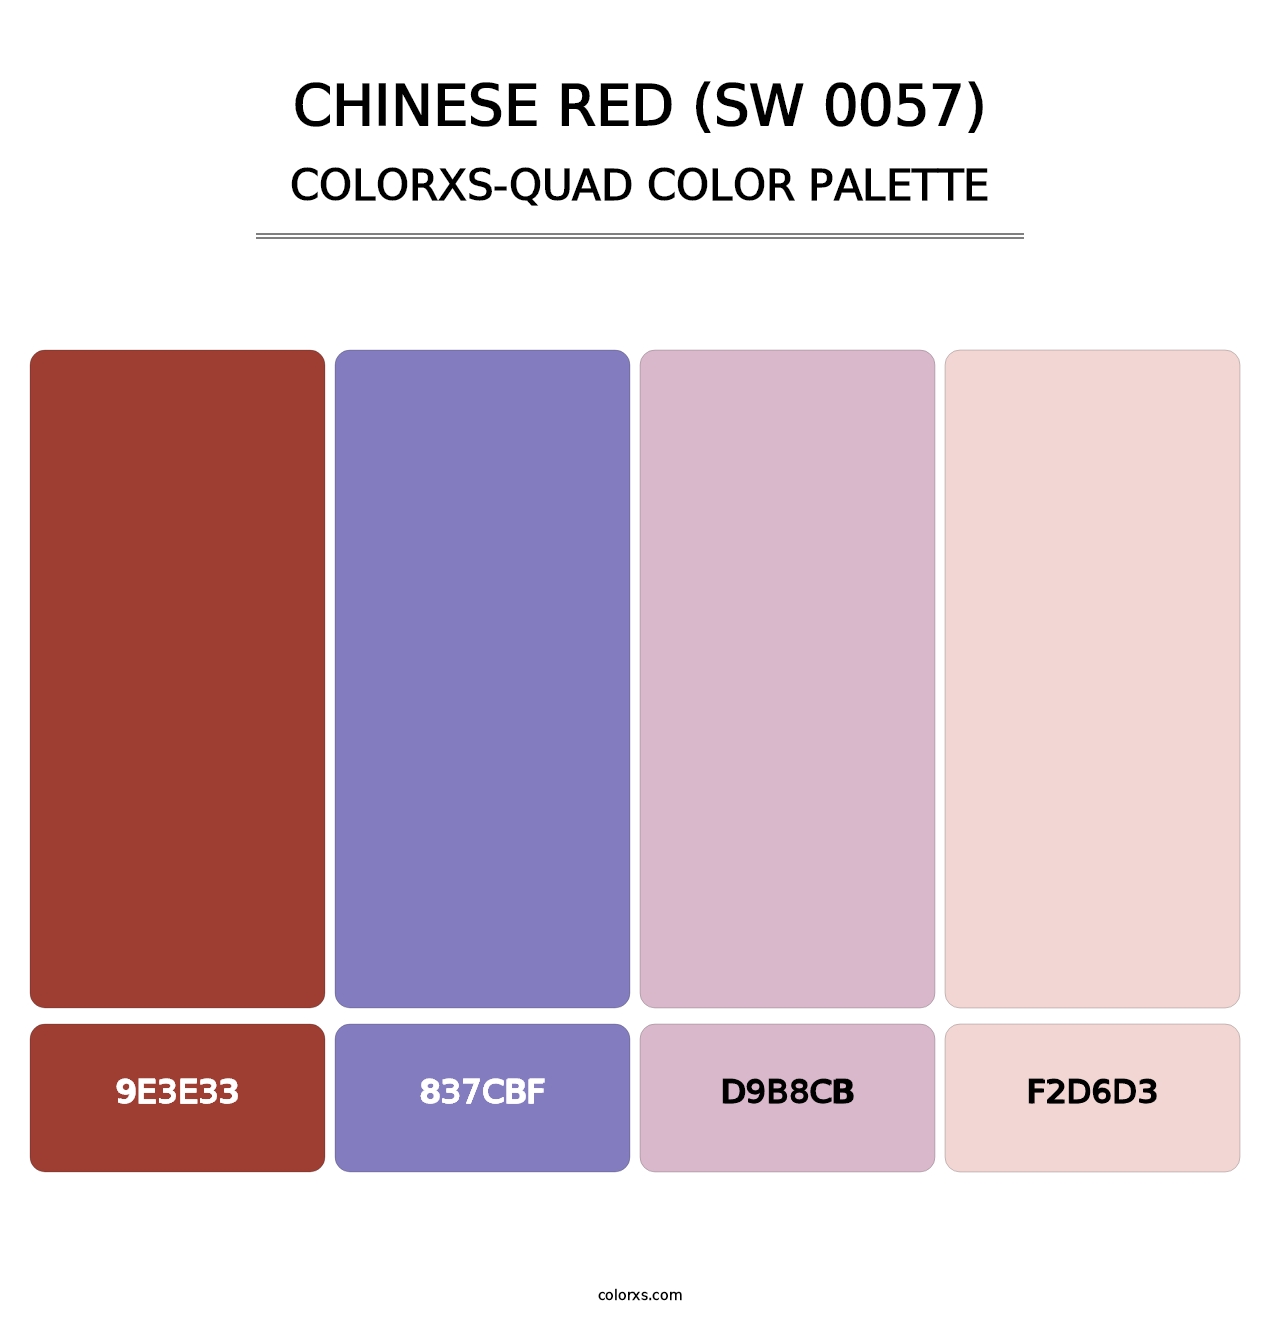 Chinese Red (SW 0057) - Colorxs Quad Palette